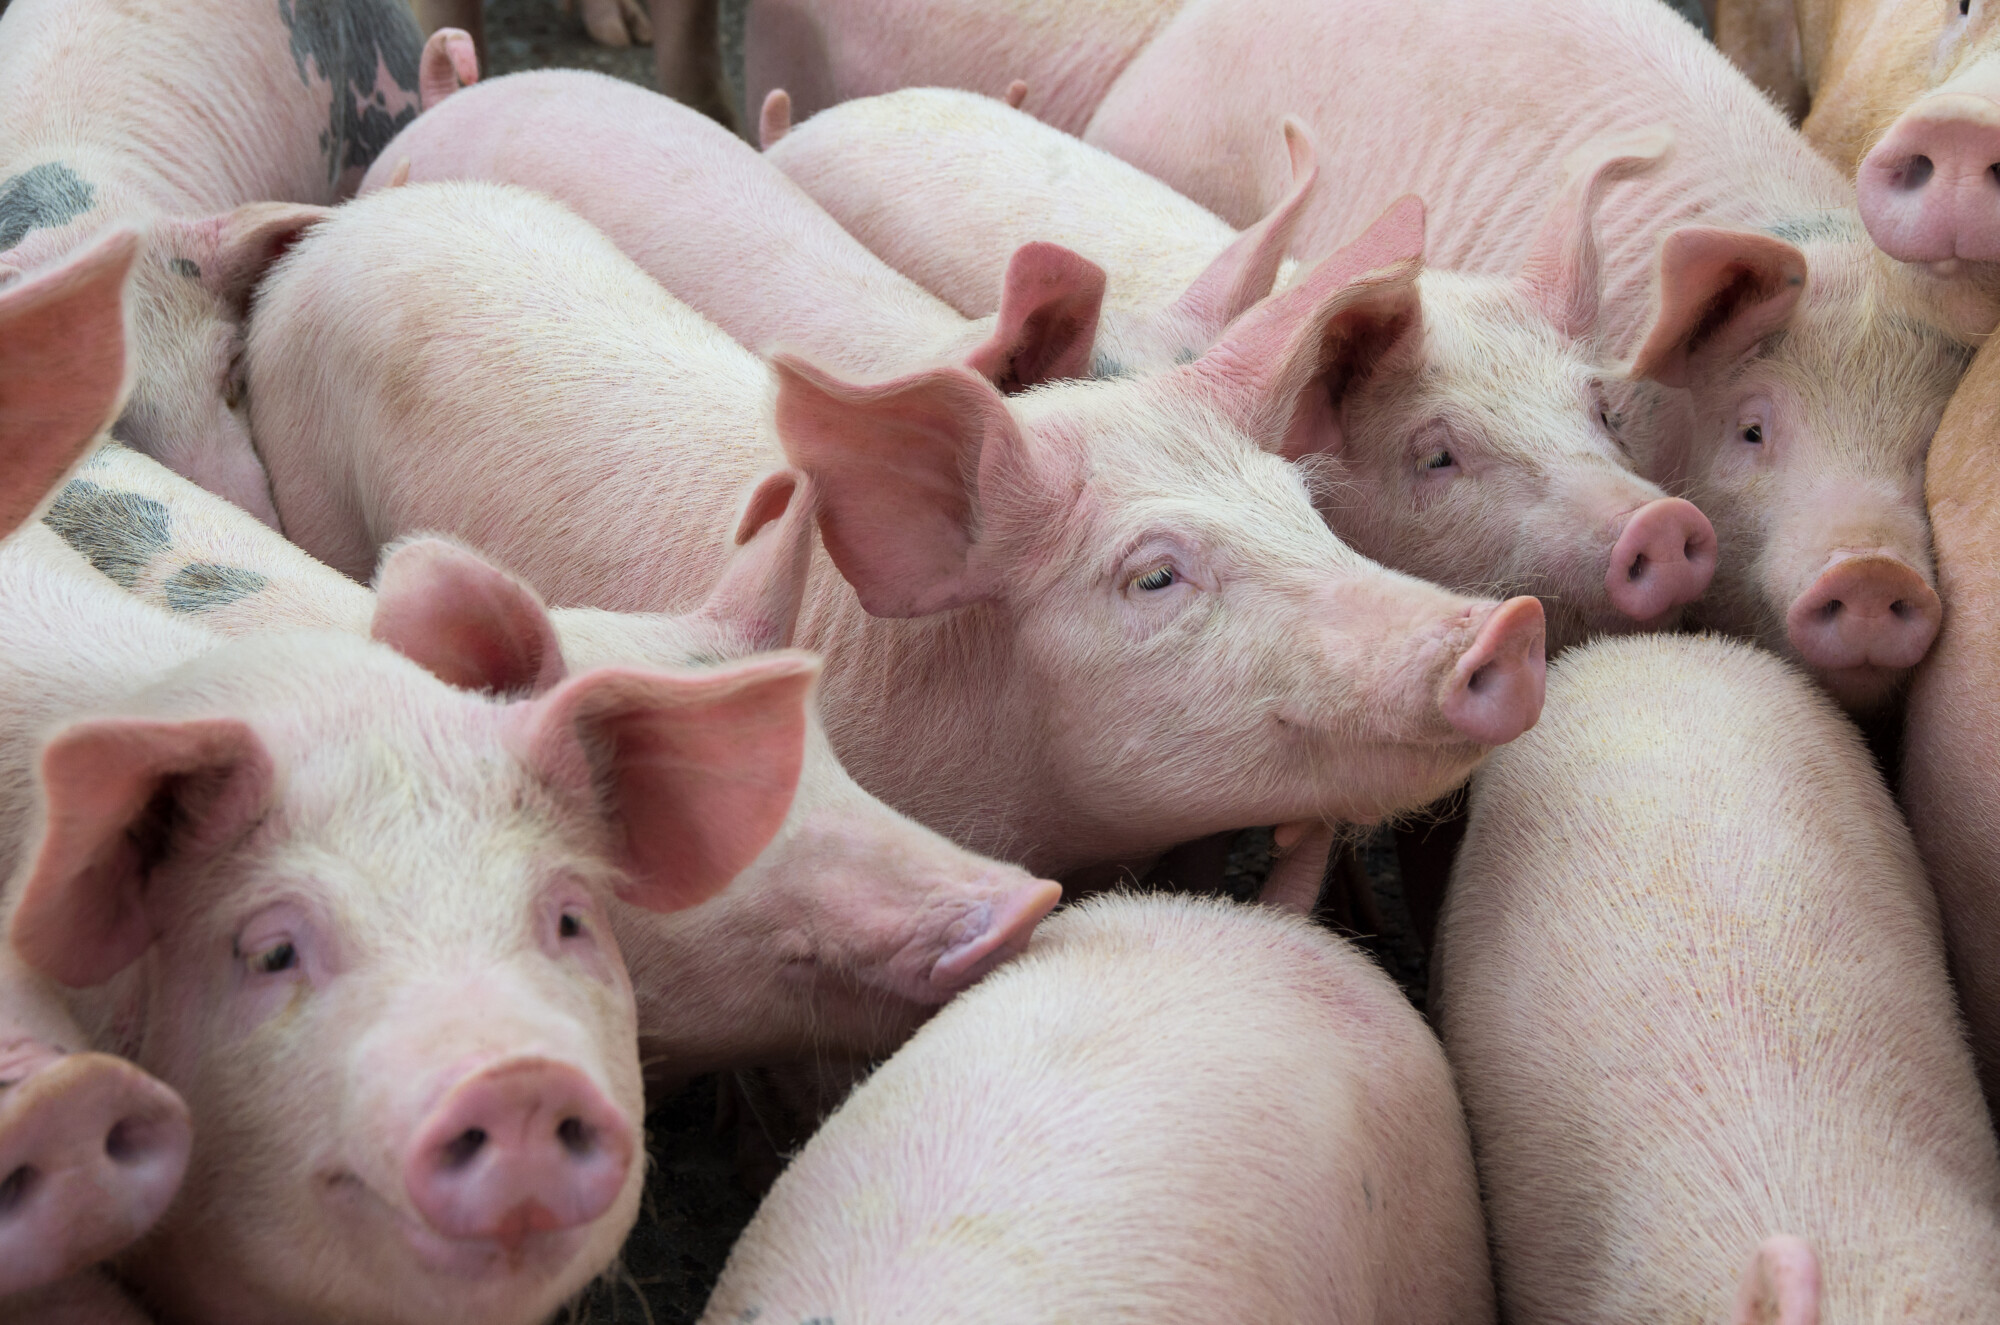 Government to take action on pig crisis